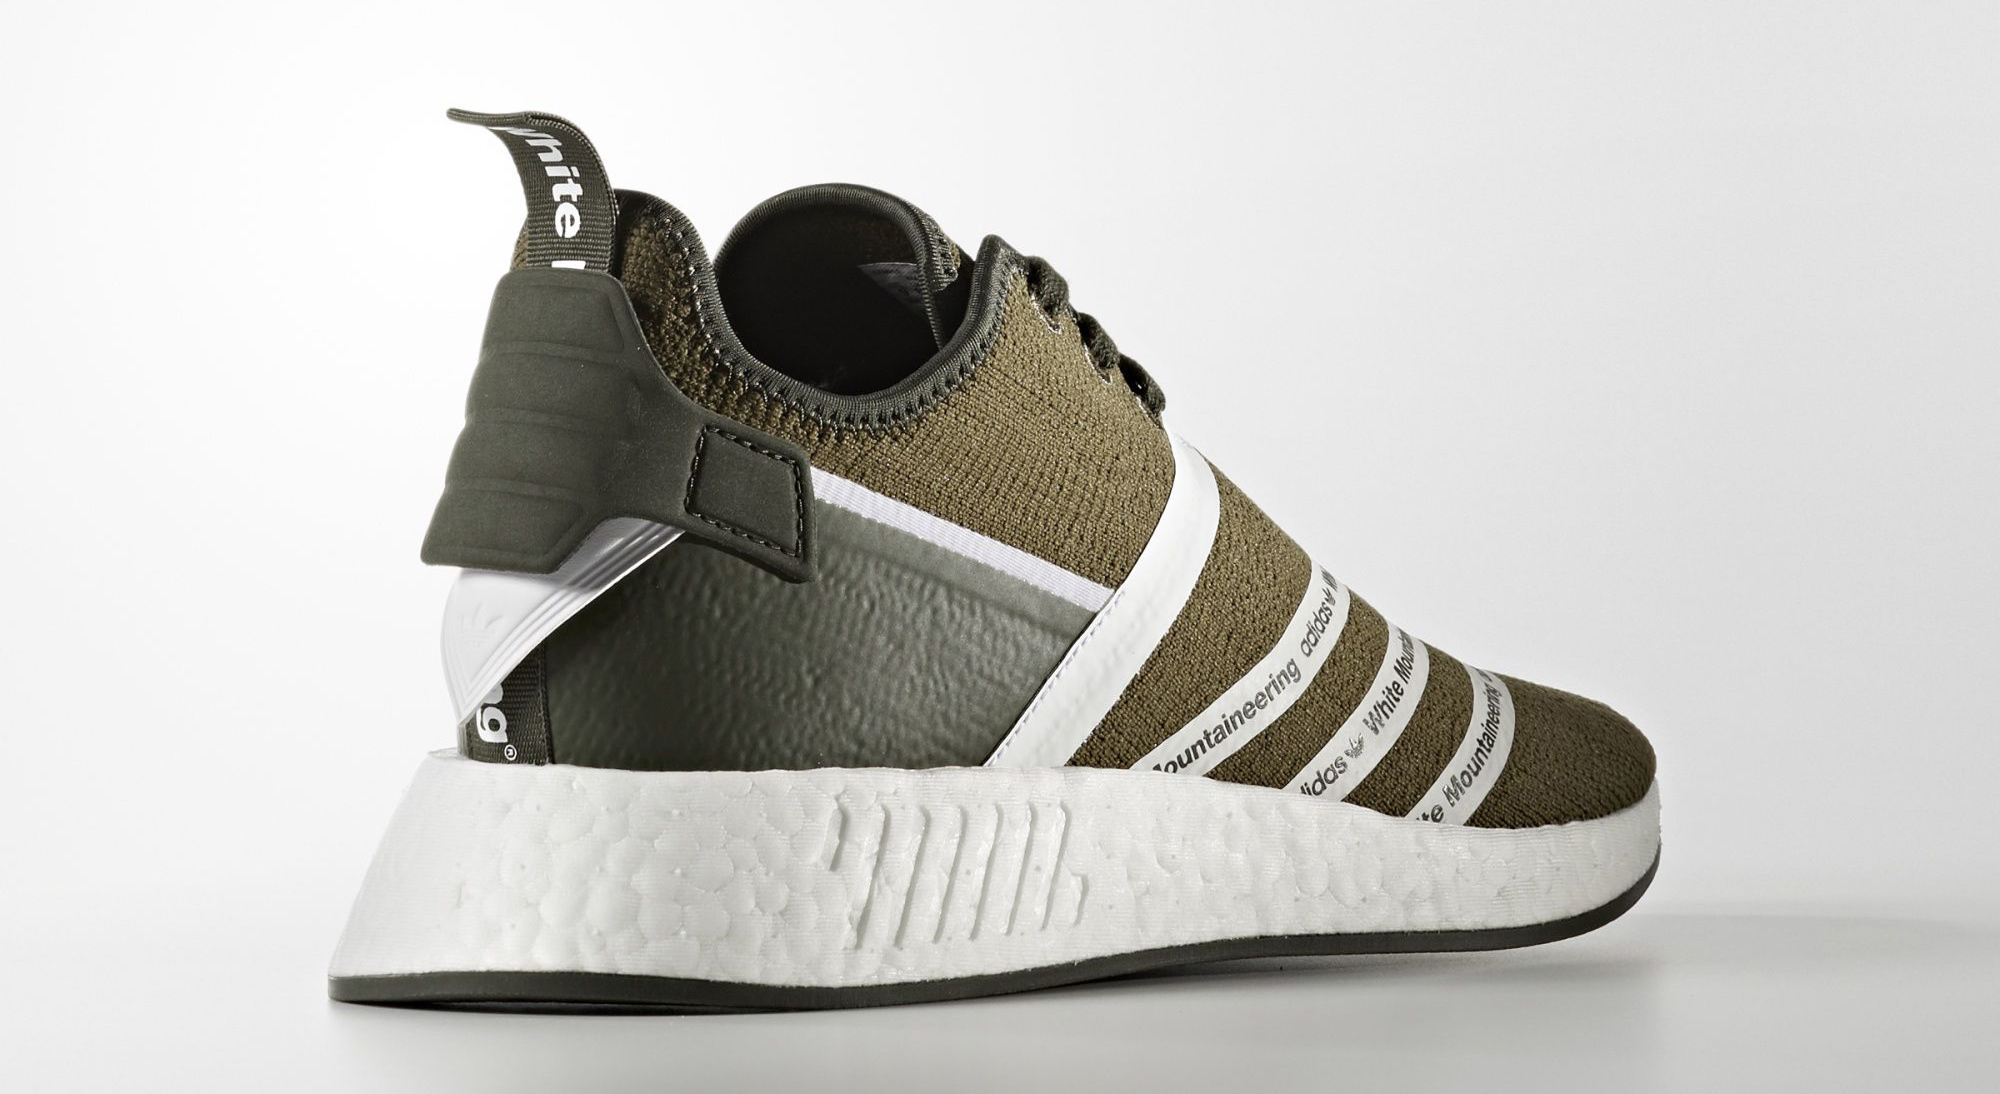 adidas-nmd_r2-pk-x-white-mountaineering-trace-olive-1